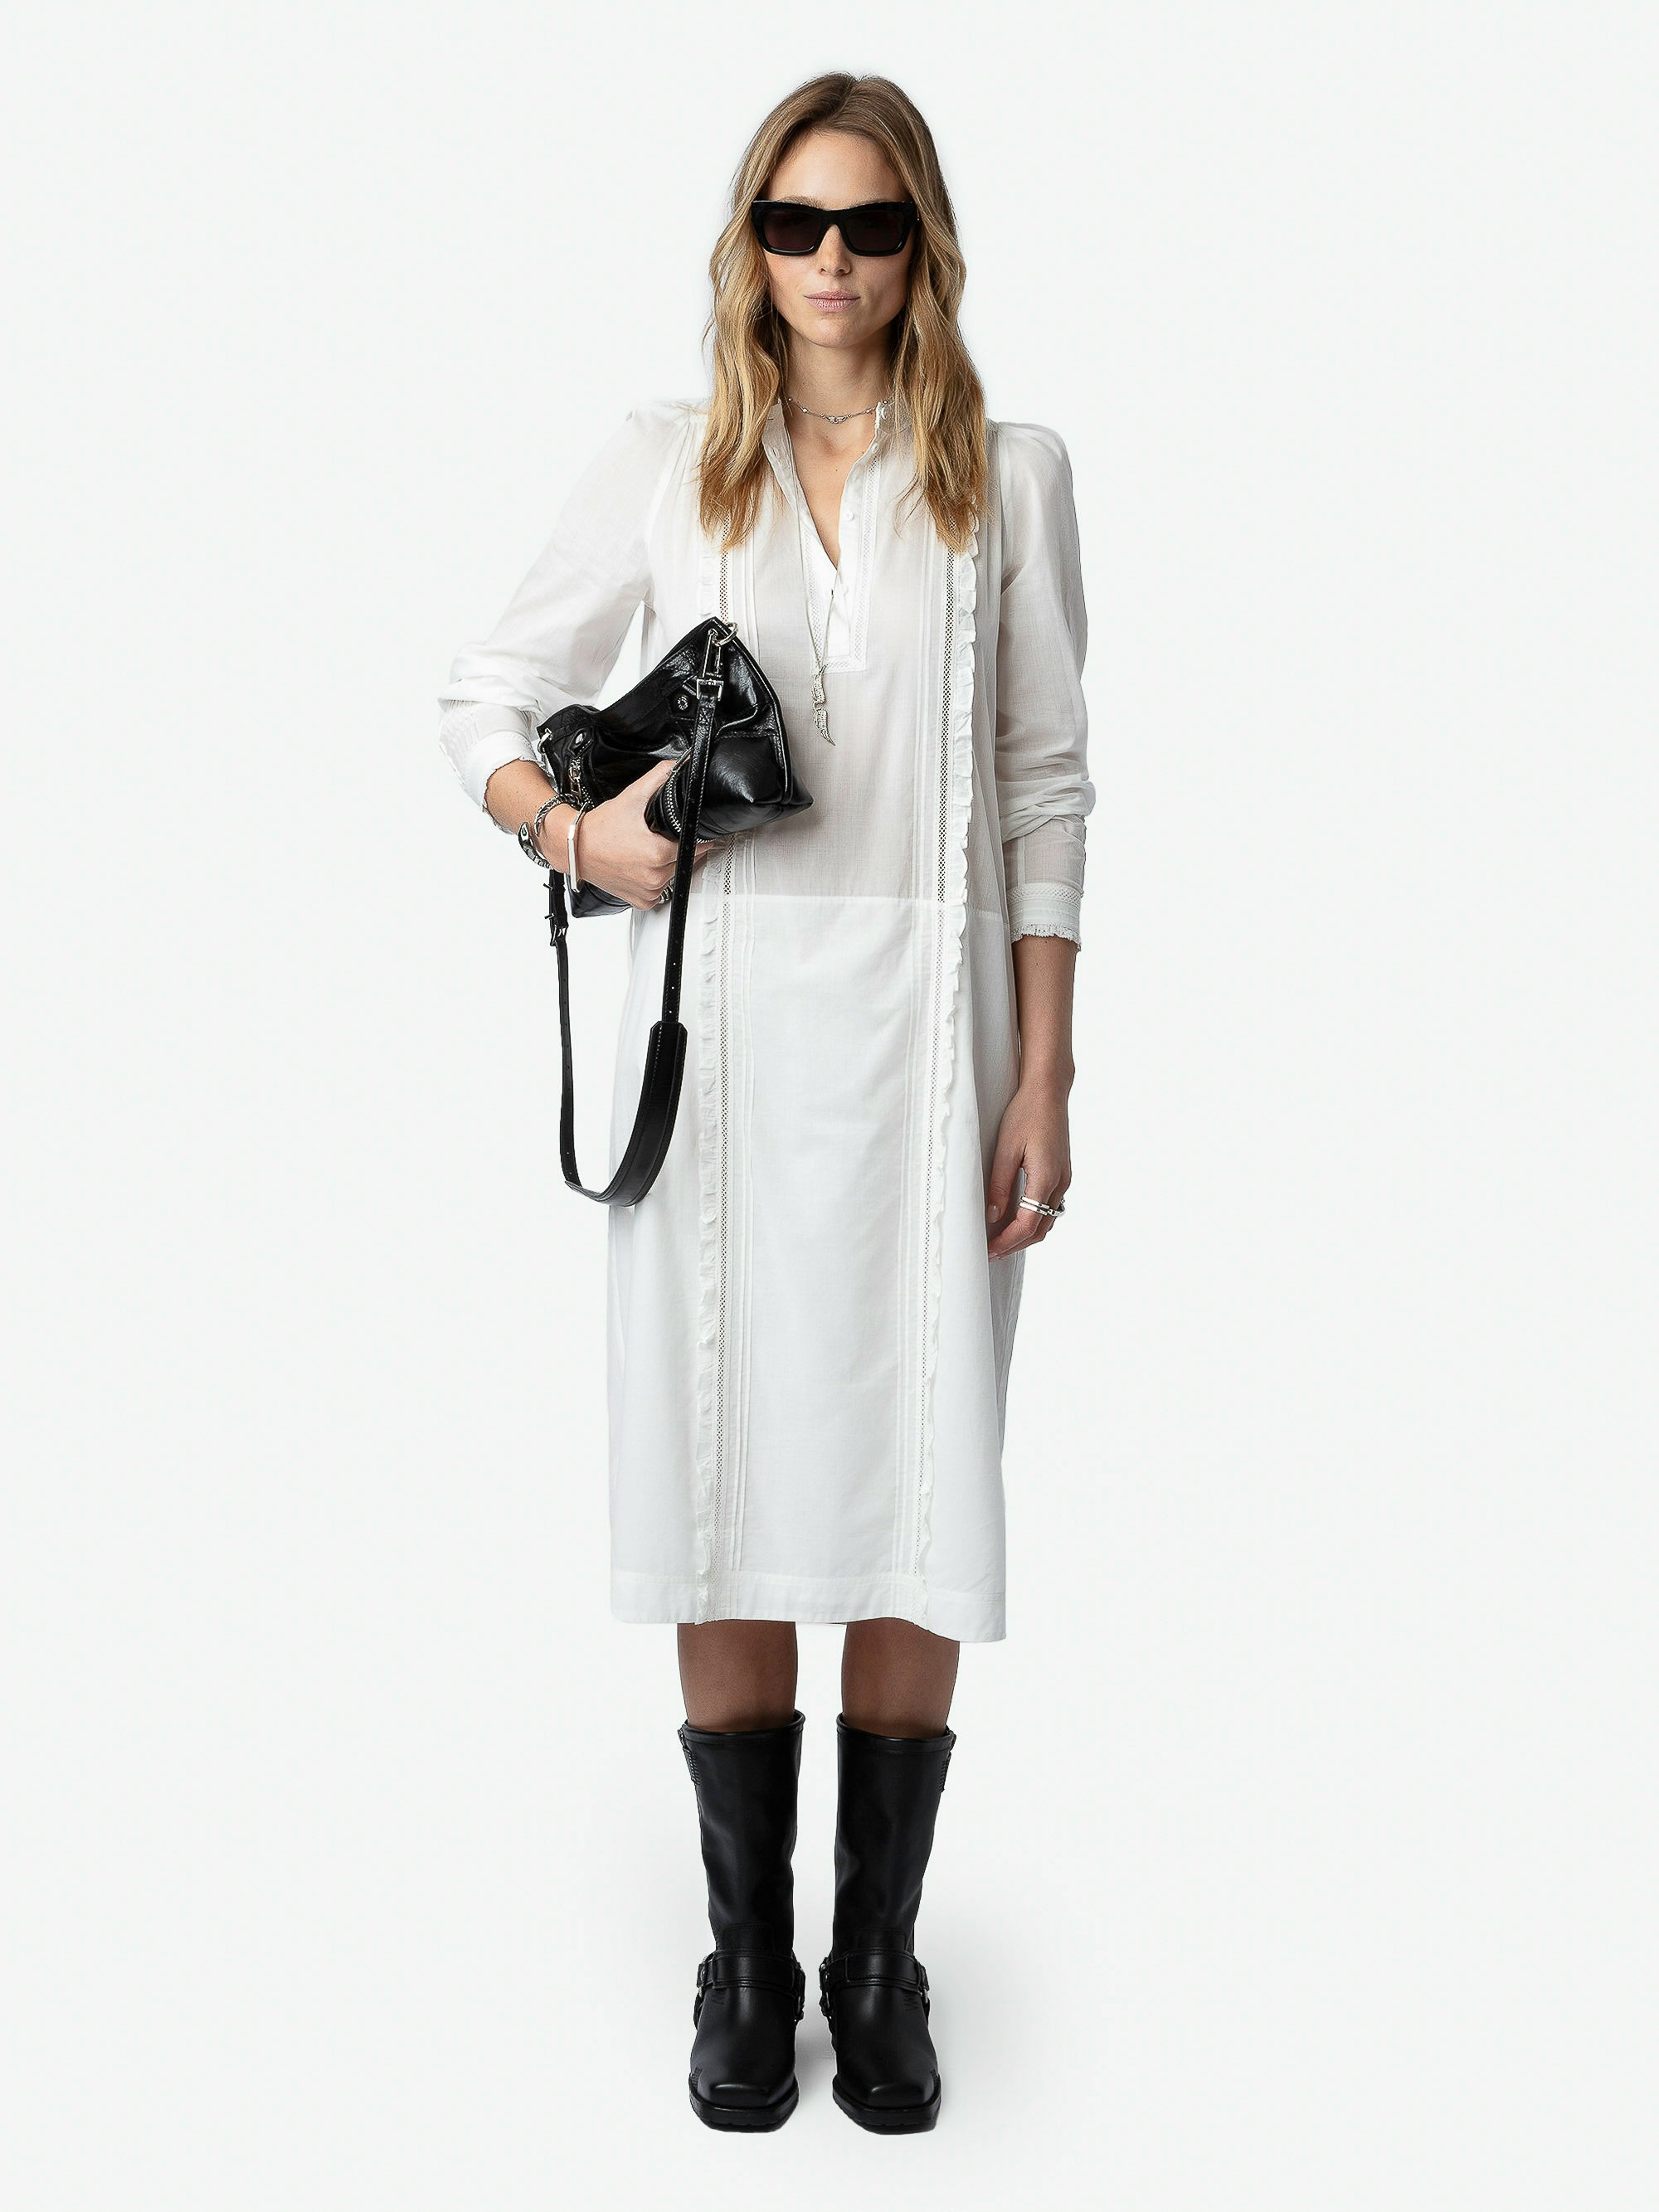 Ritchil Dress - Long-sleeved white cotton voile midi dress with removable belt, lace and ruffles.